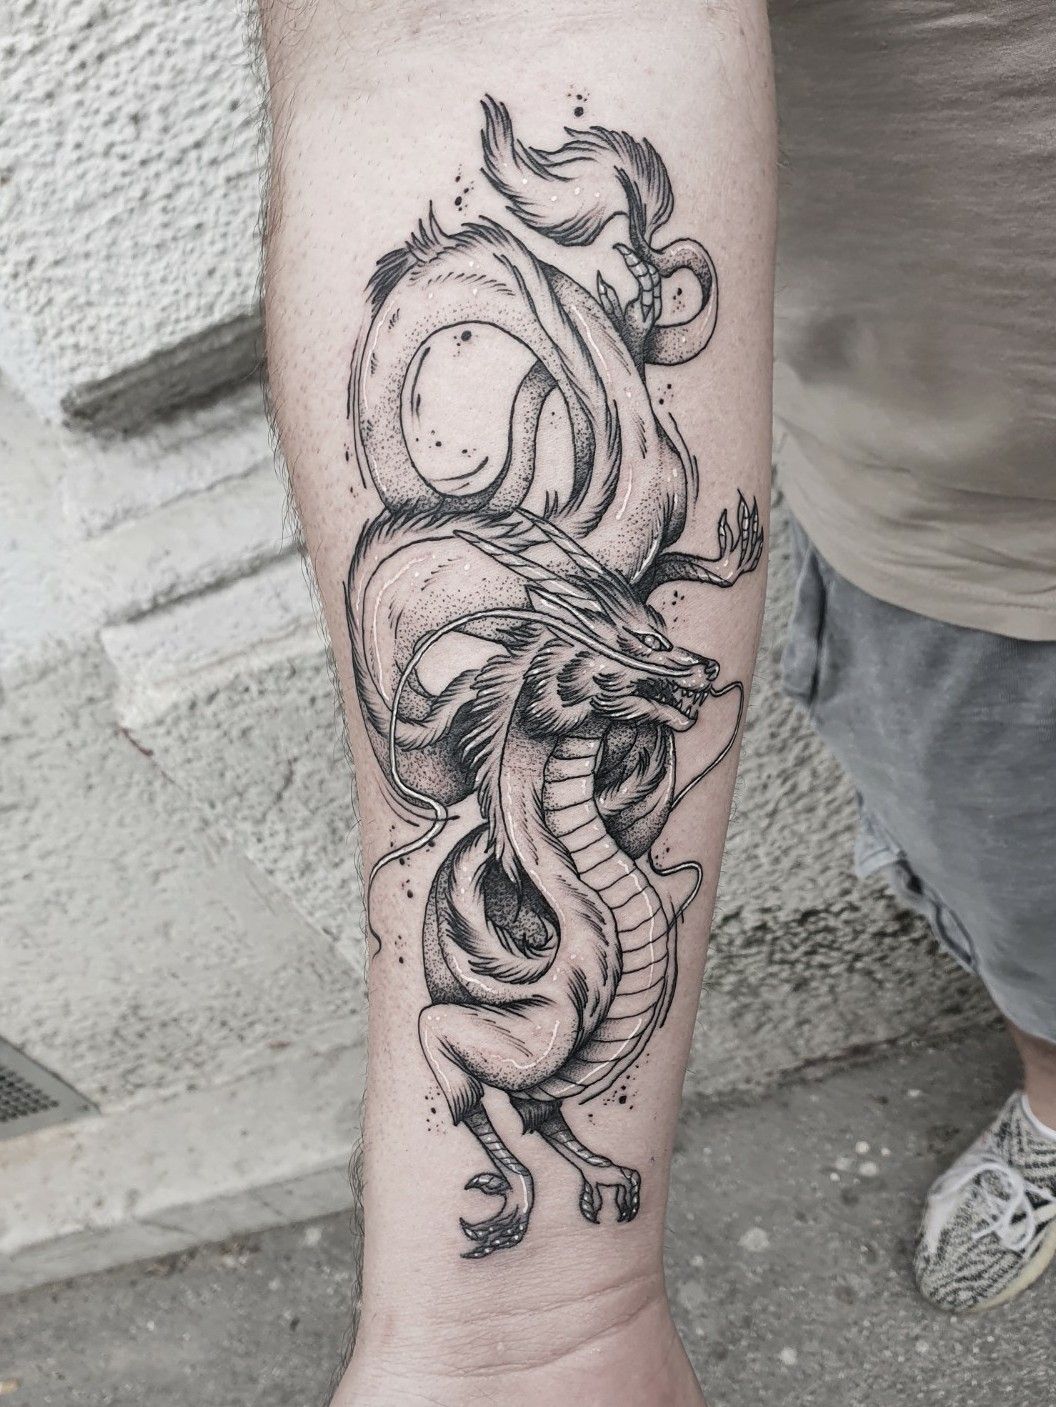 English Cousins on Instagram Hungarian horntail  Body art tattoos Tattoos  Tattoo you